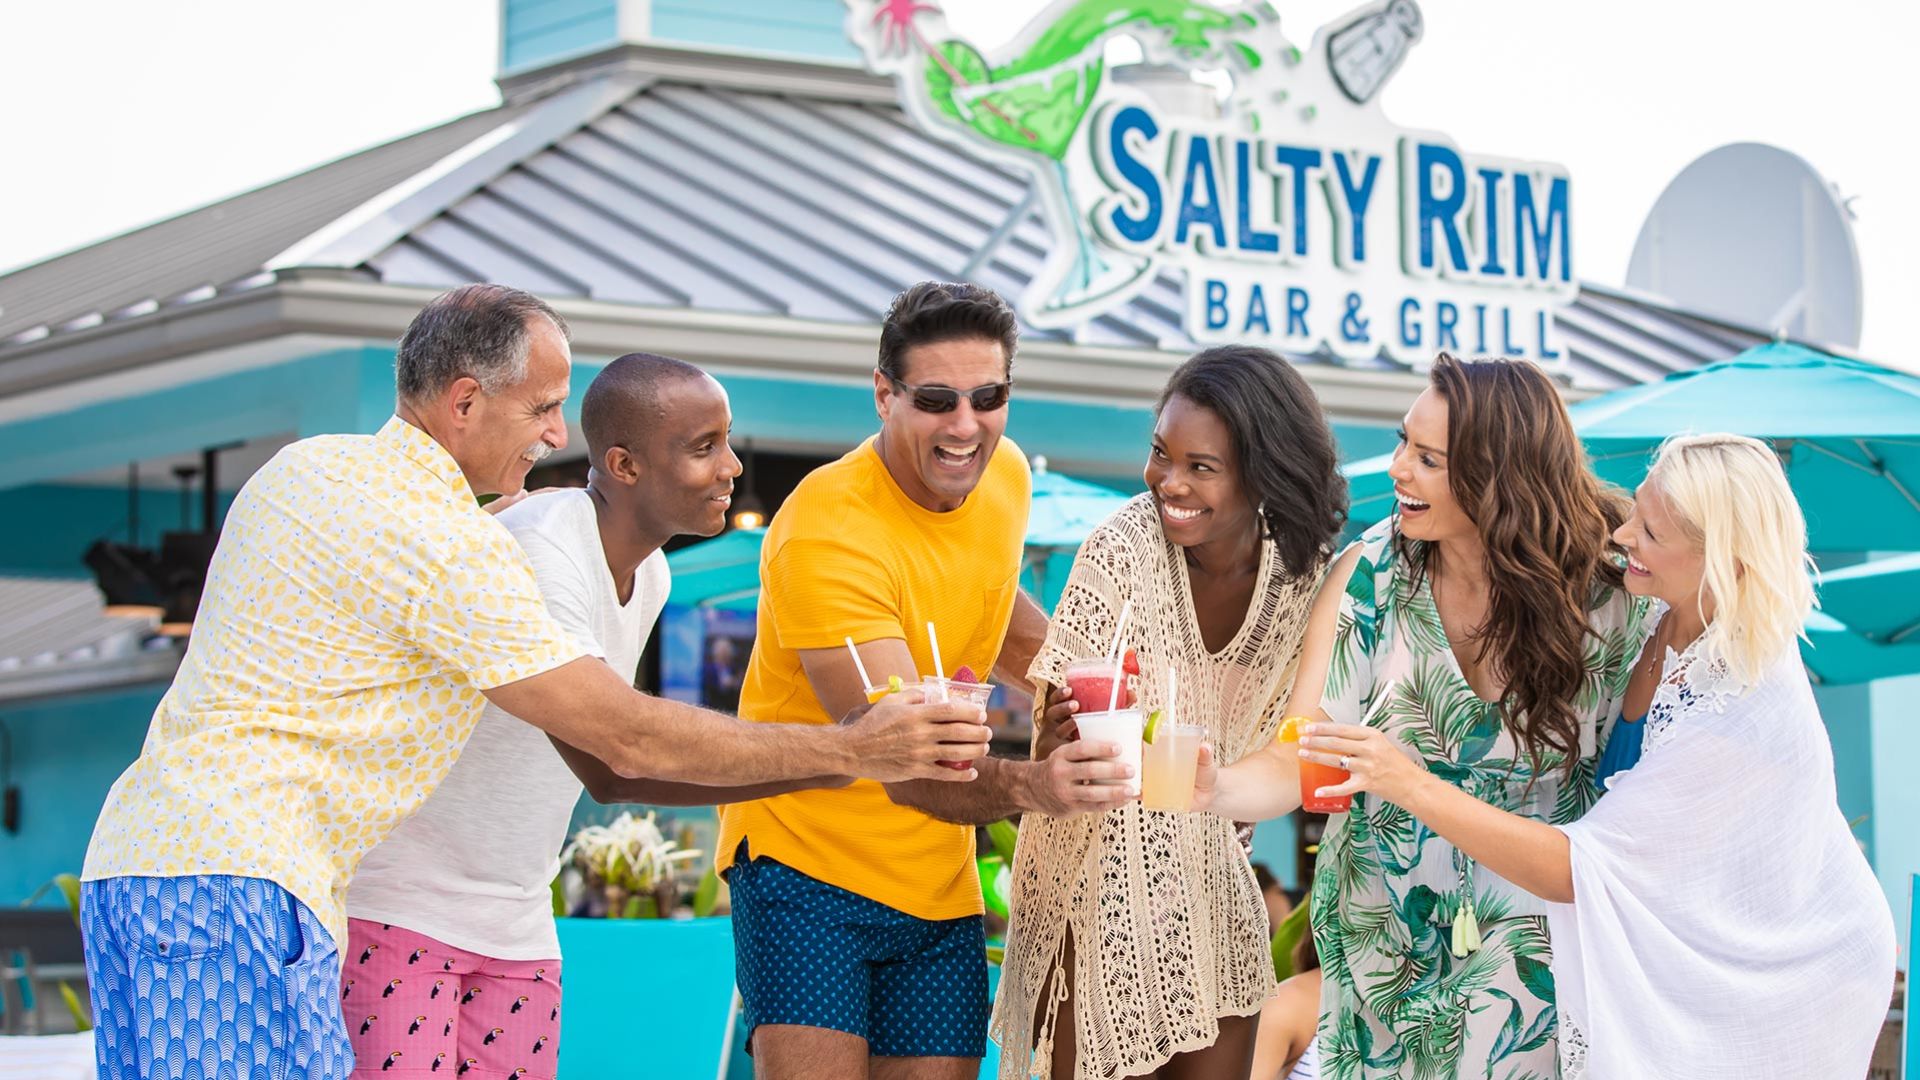 Group of people toast with drink cups outside the Salty Rim Bar and Grill at Margaritaville Resort Orlando.